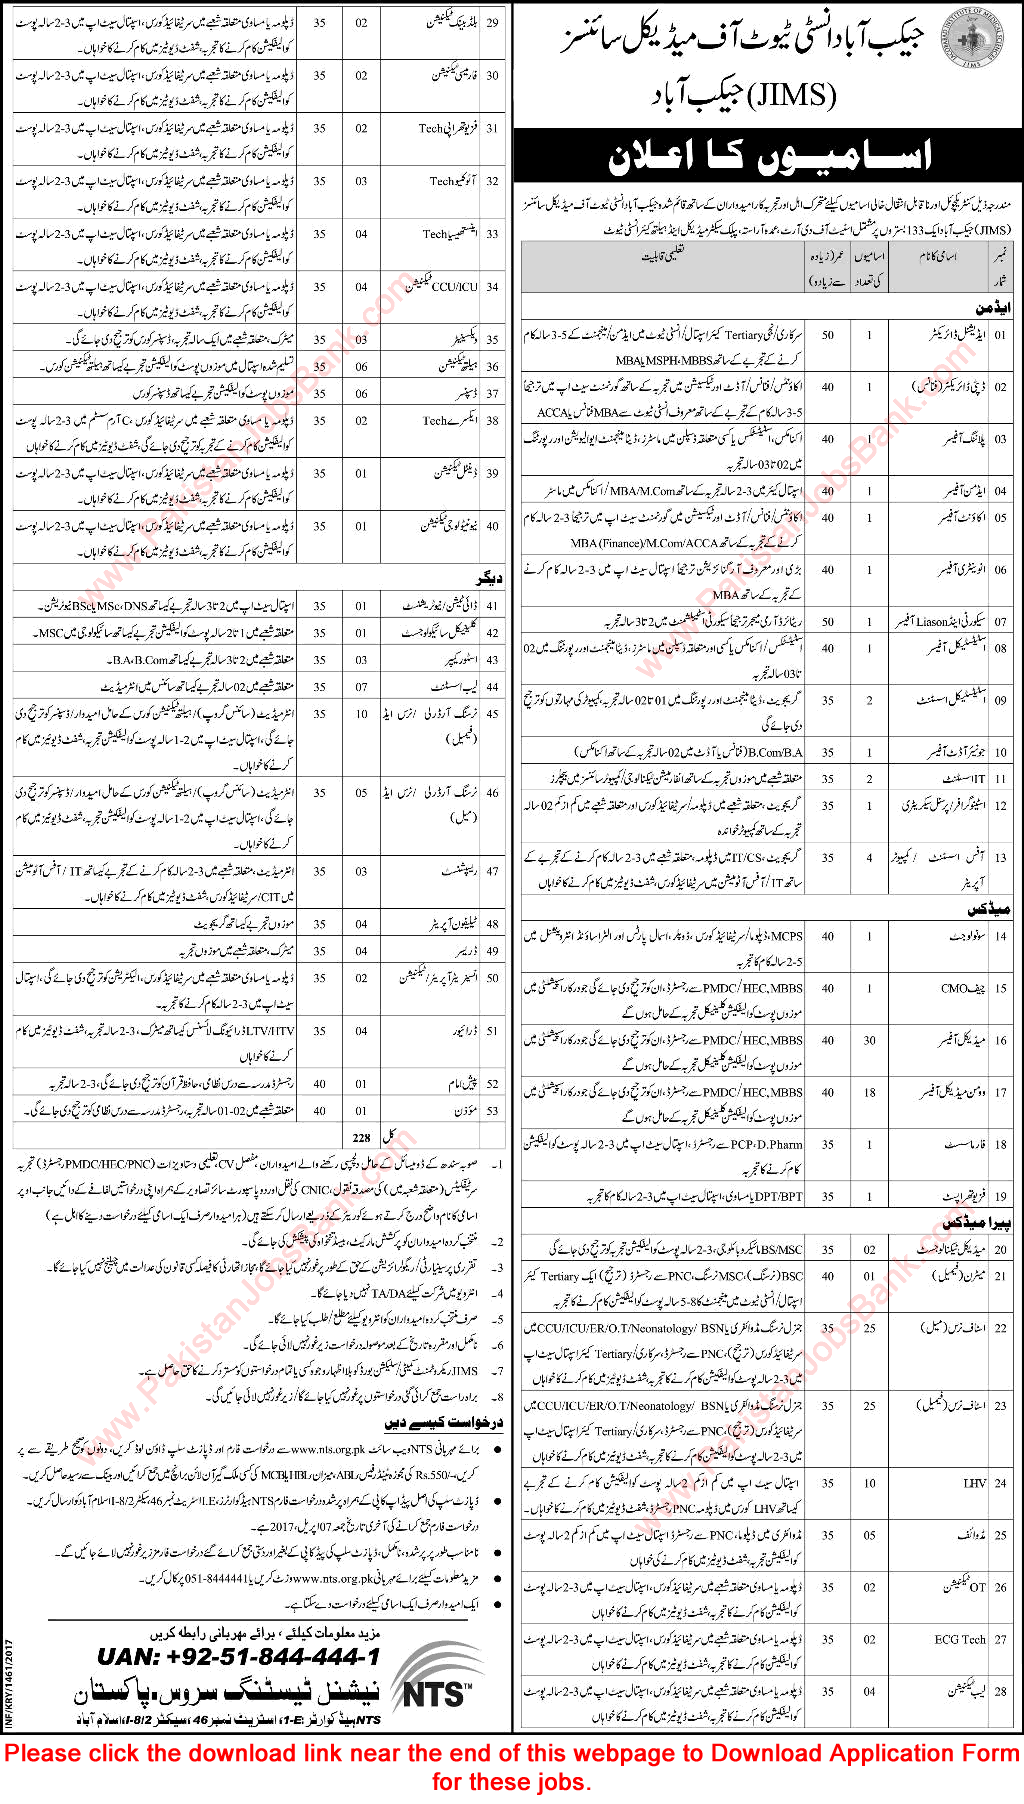 Jacobabad Institute of Medical Science Jobs 2017 March JIMS NTS Application Form Download Latest